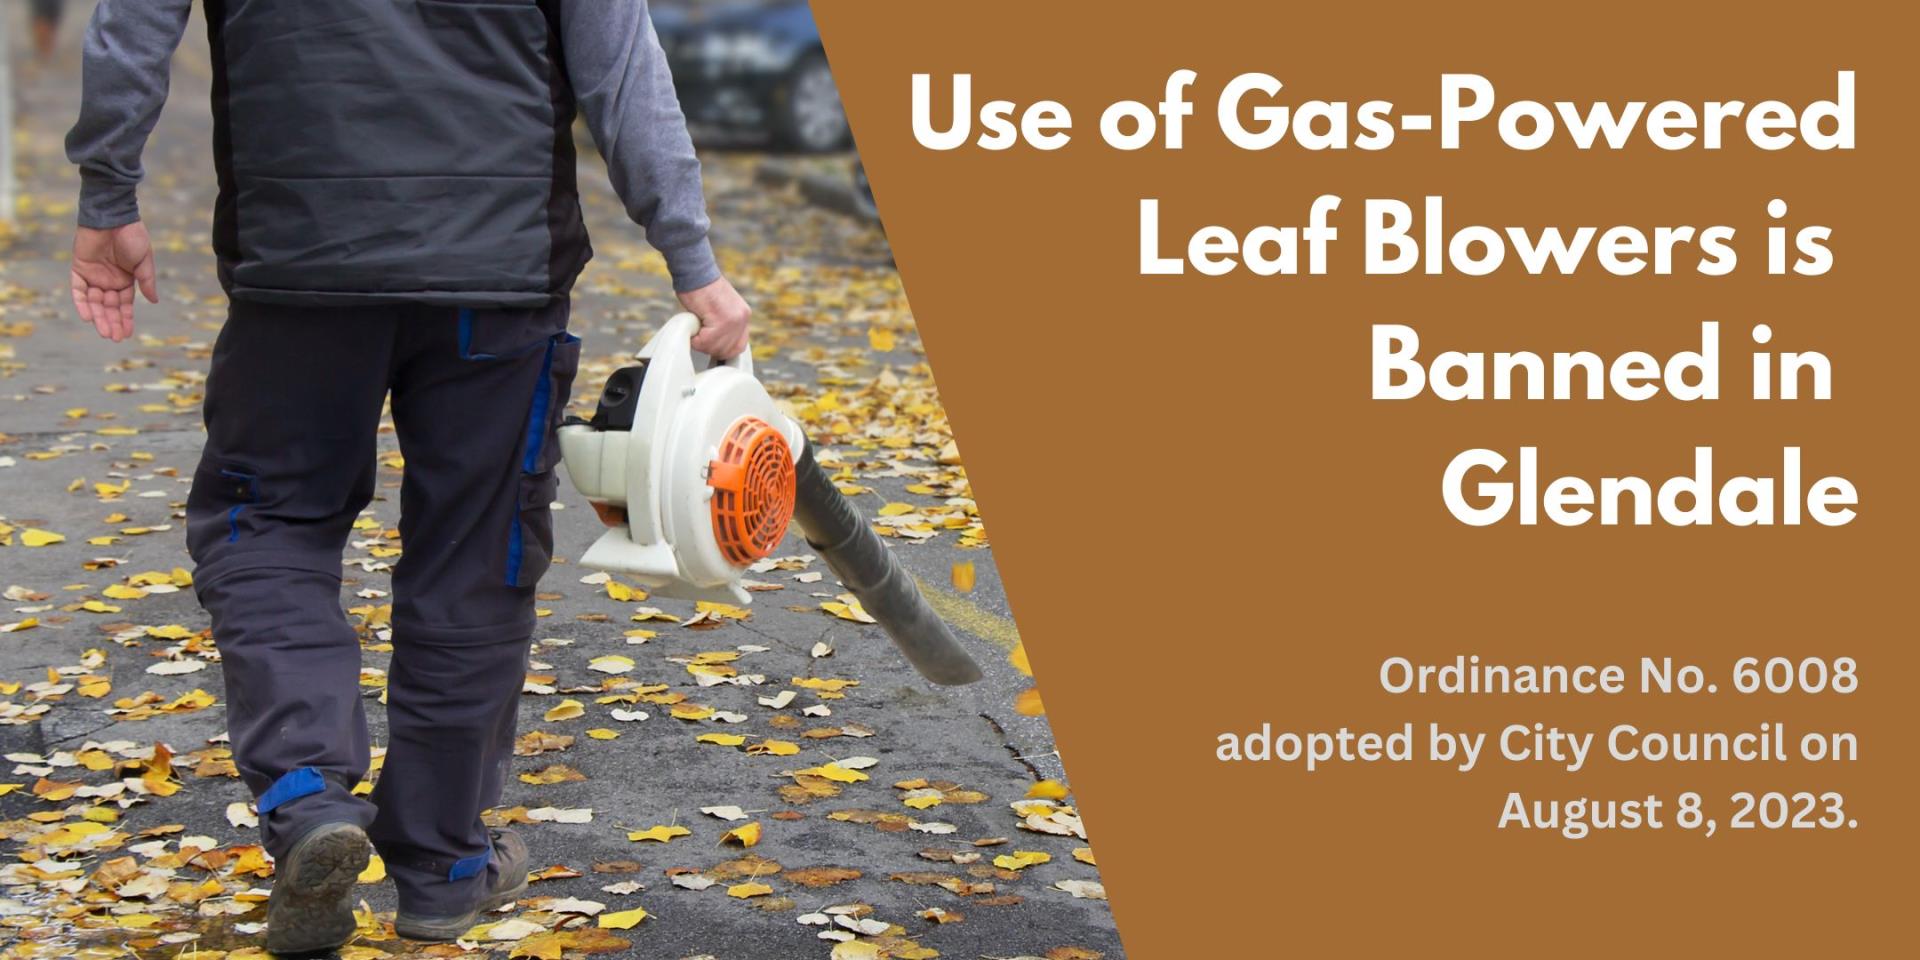 Prohibition on the Use of Gas-powered leaf blowers